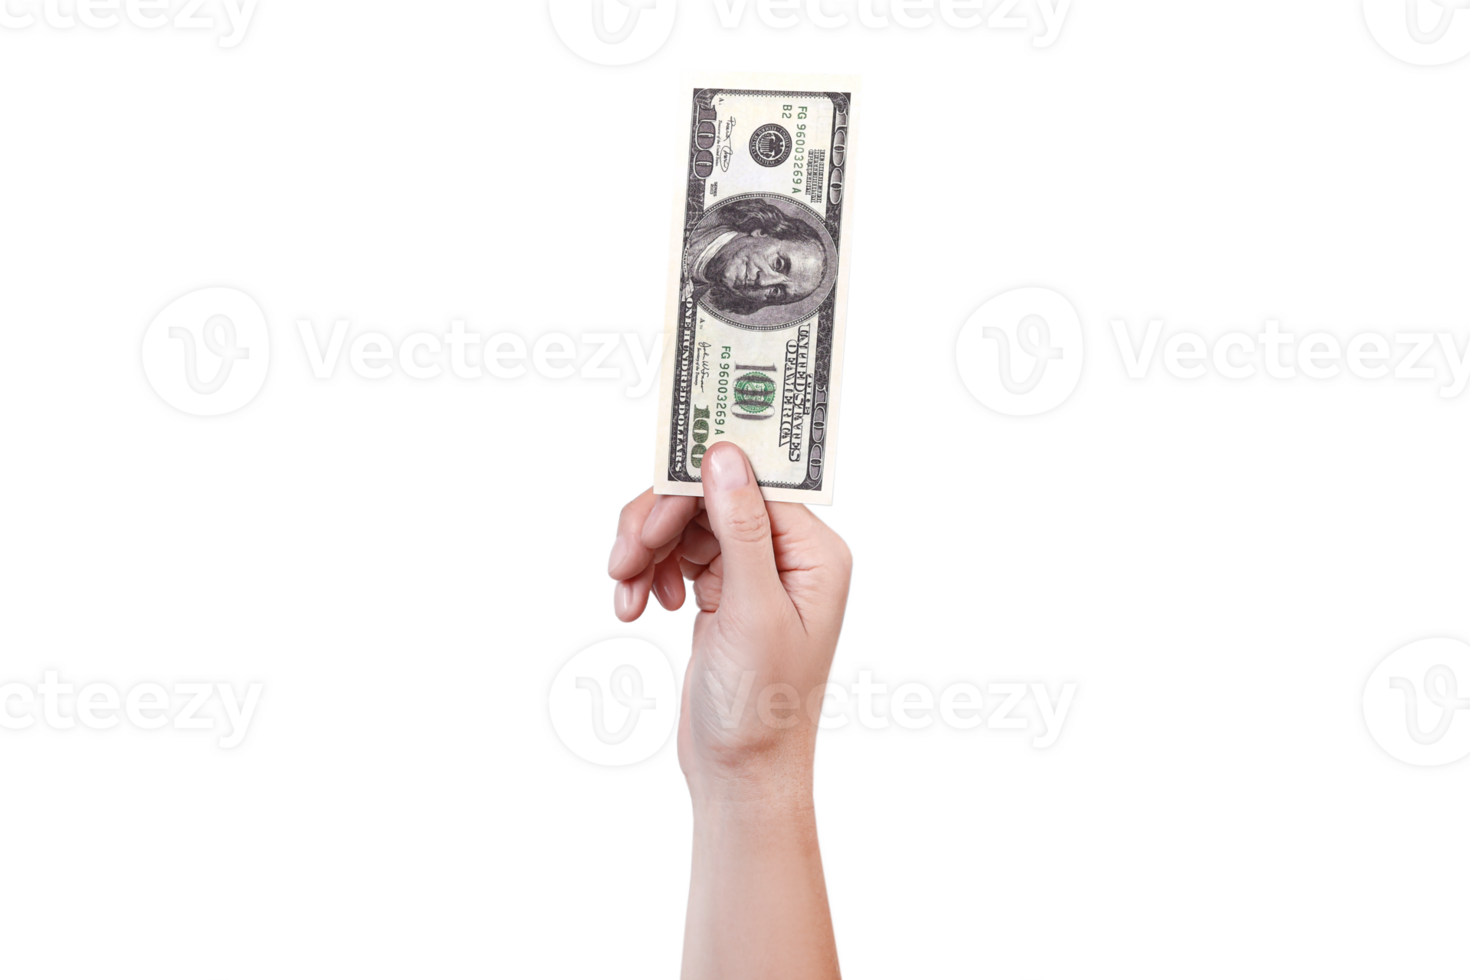 Hand below shows money 100 dollar bill. Money in a hand isolated on  png transparent background